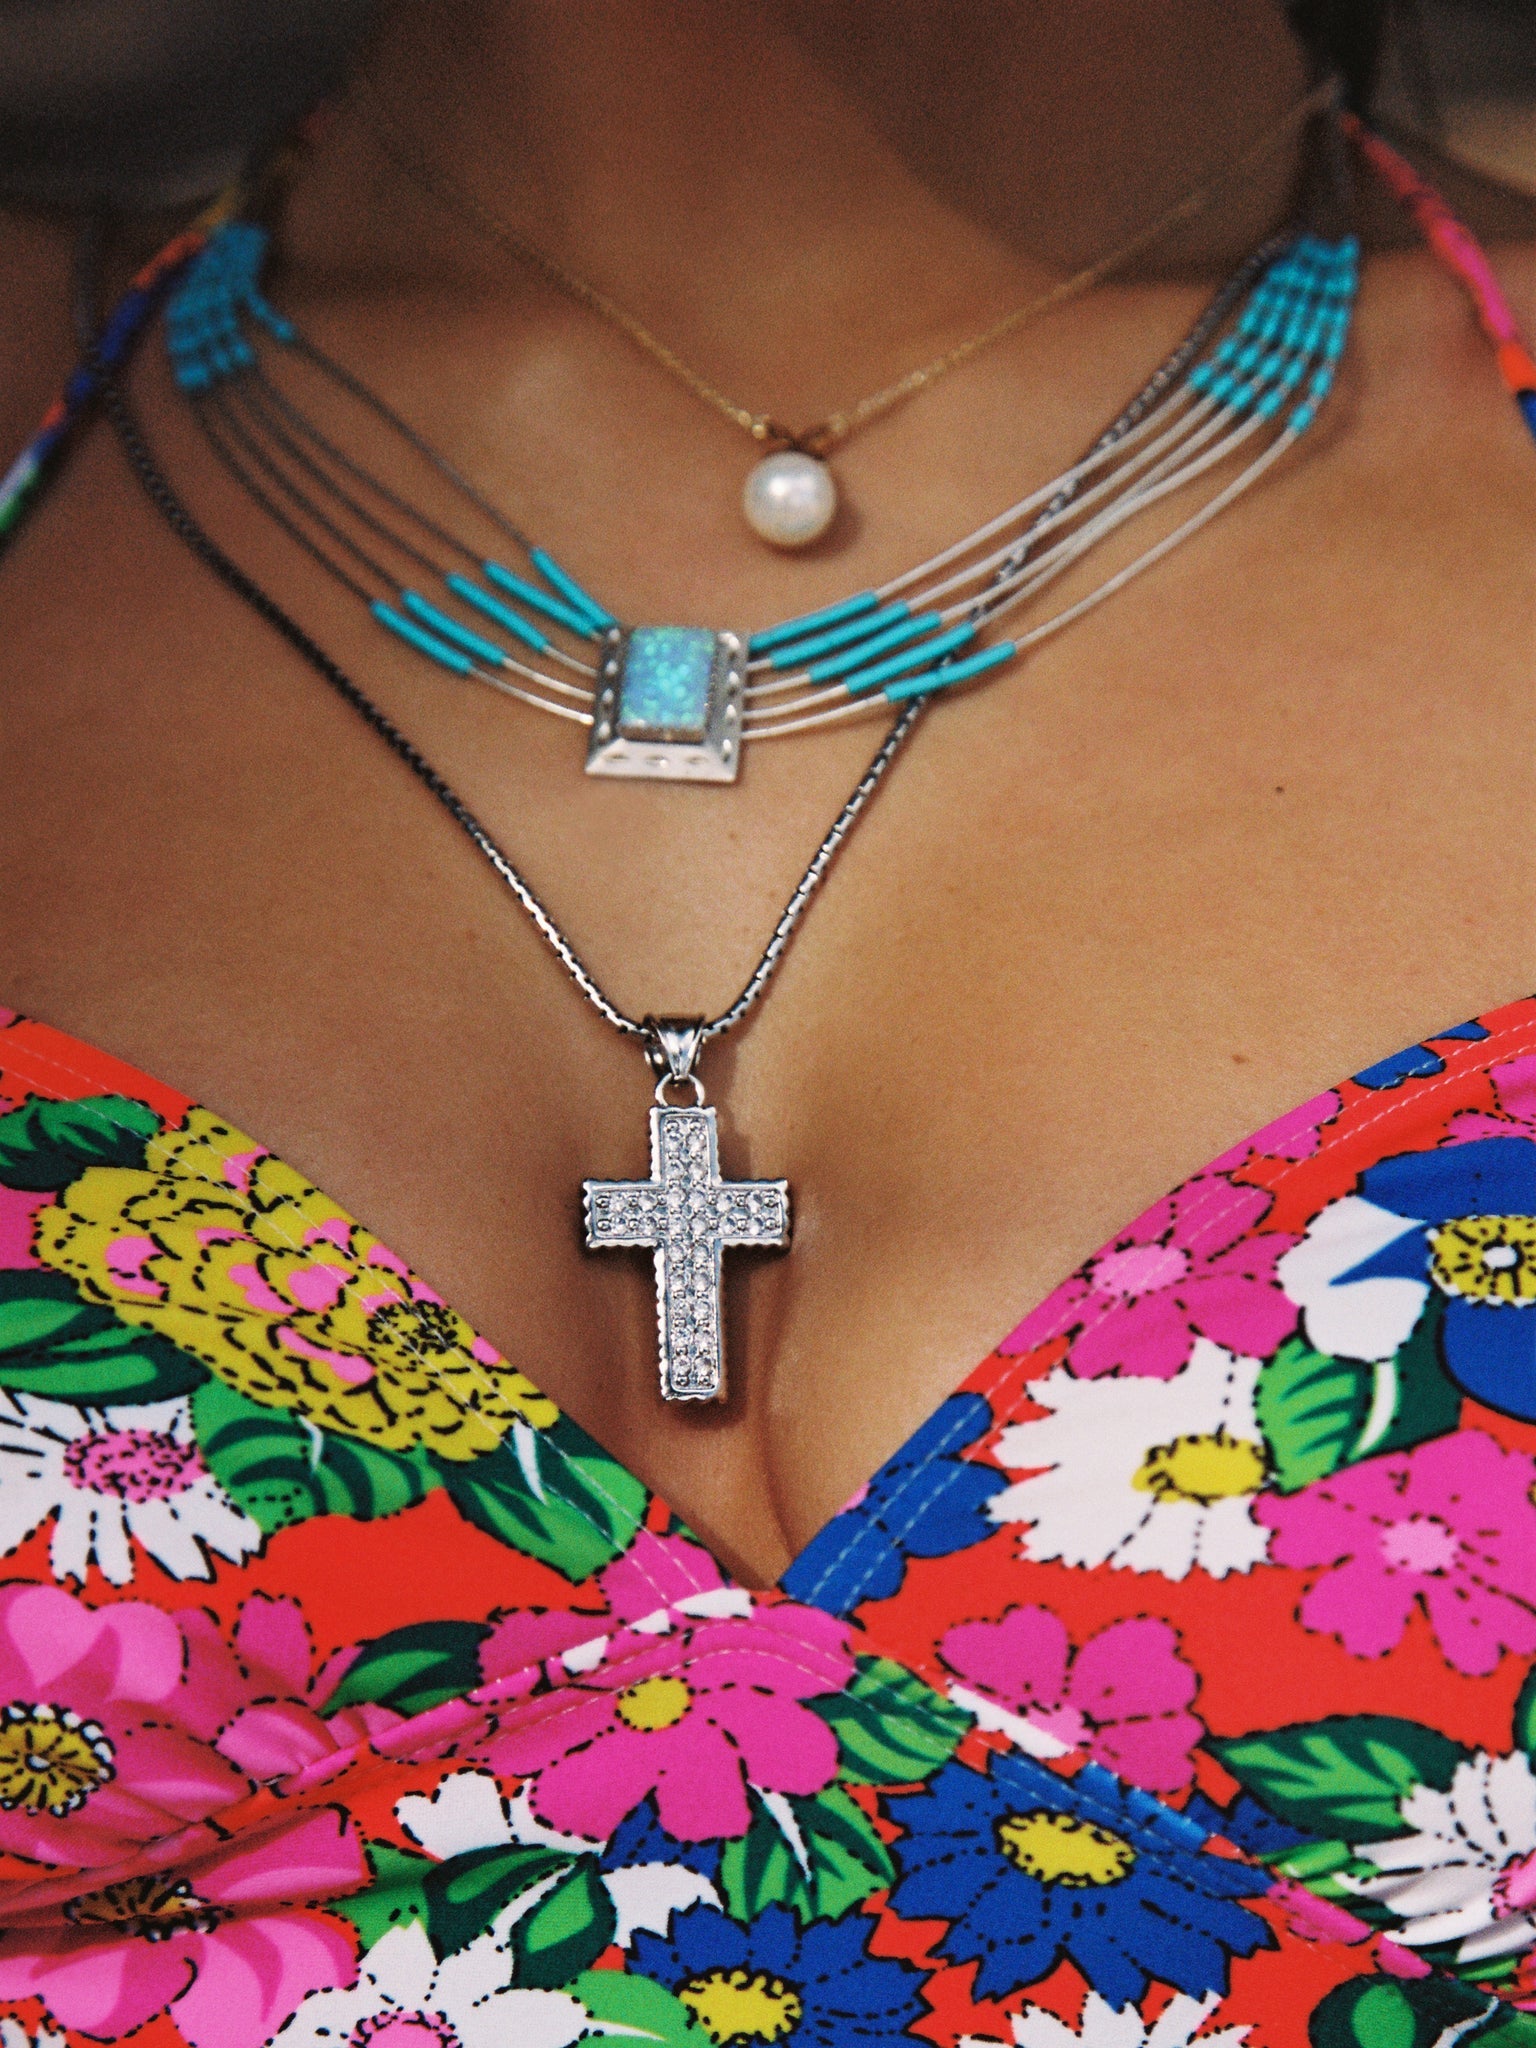 The Mariah Cross Necklace